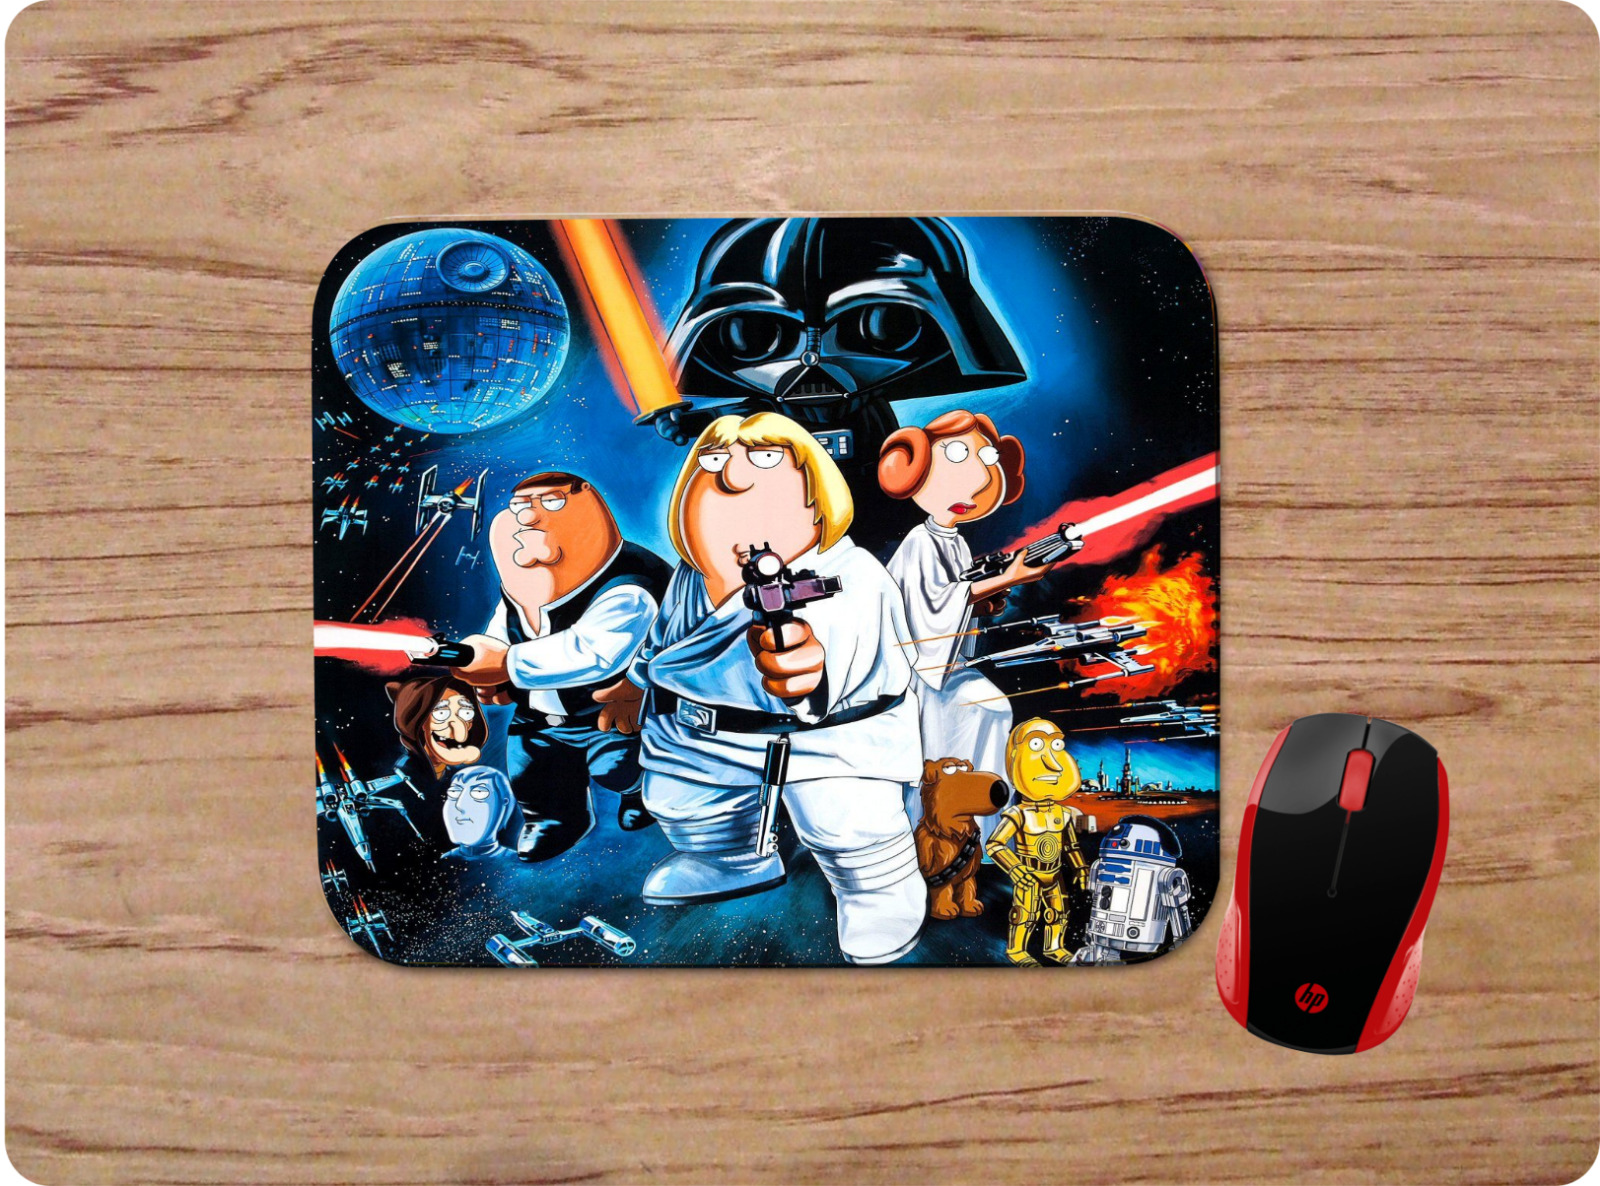 FAMILY GUY BLUE HARVEST CUSTOM MOUSE PAD GAMING COMPUTER HOME OFFICE 